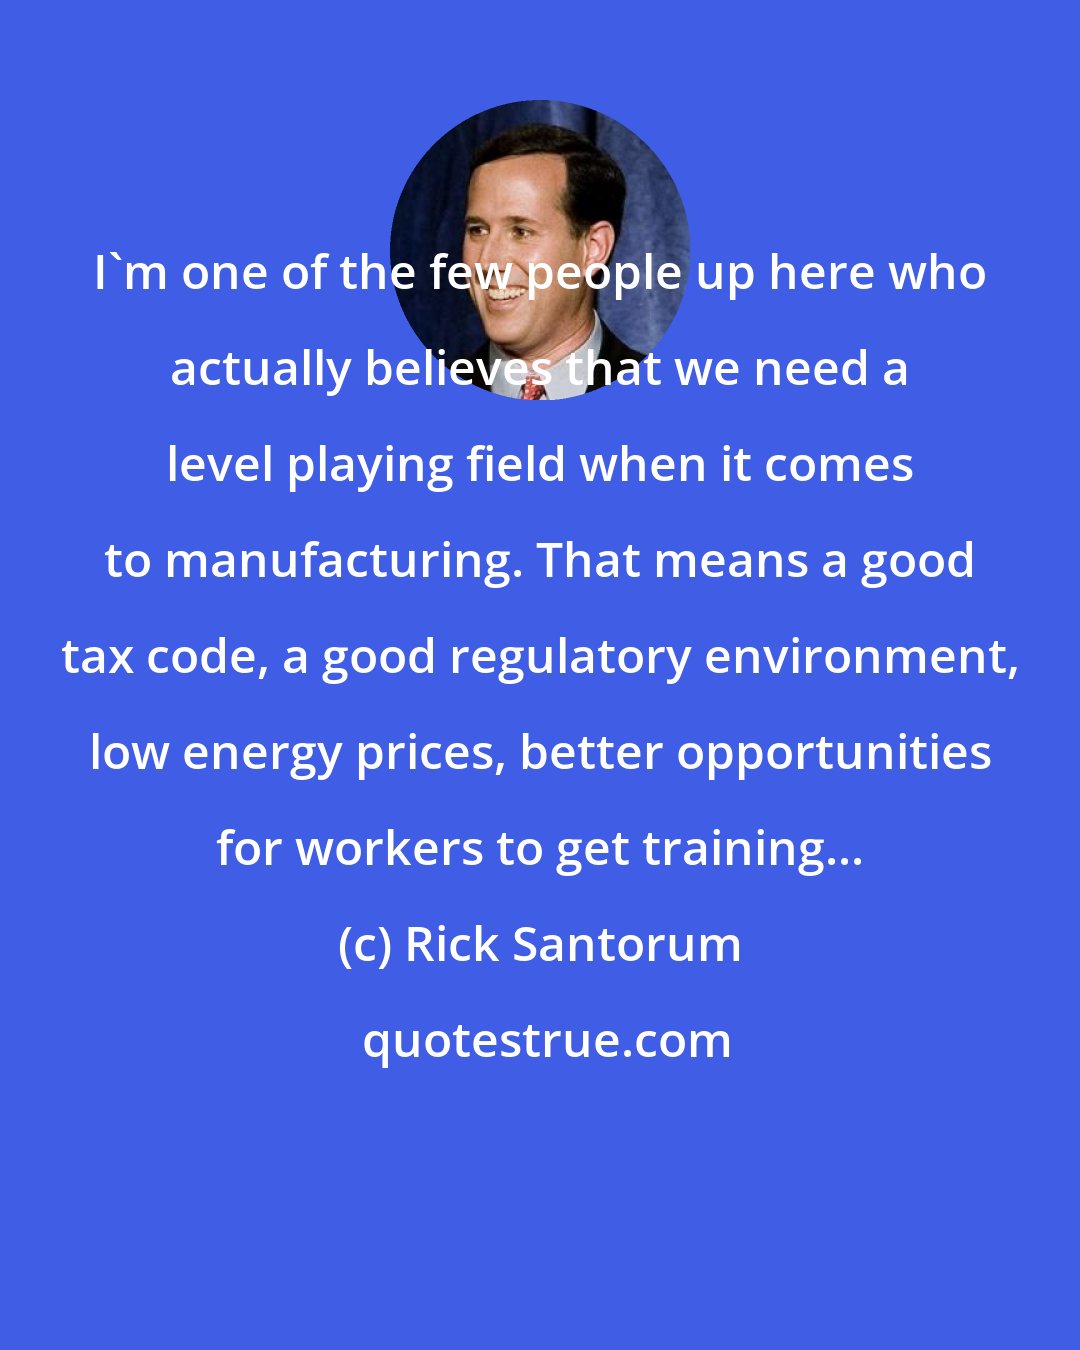 Rick Santorum: I'm one of the few people up here who actually believes that we need a level playing field when it comes to manufacturing. That means a good tax code, a good regulatory environment, low energy prices, better opportunities for workers to get training...